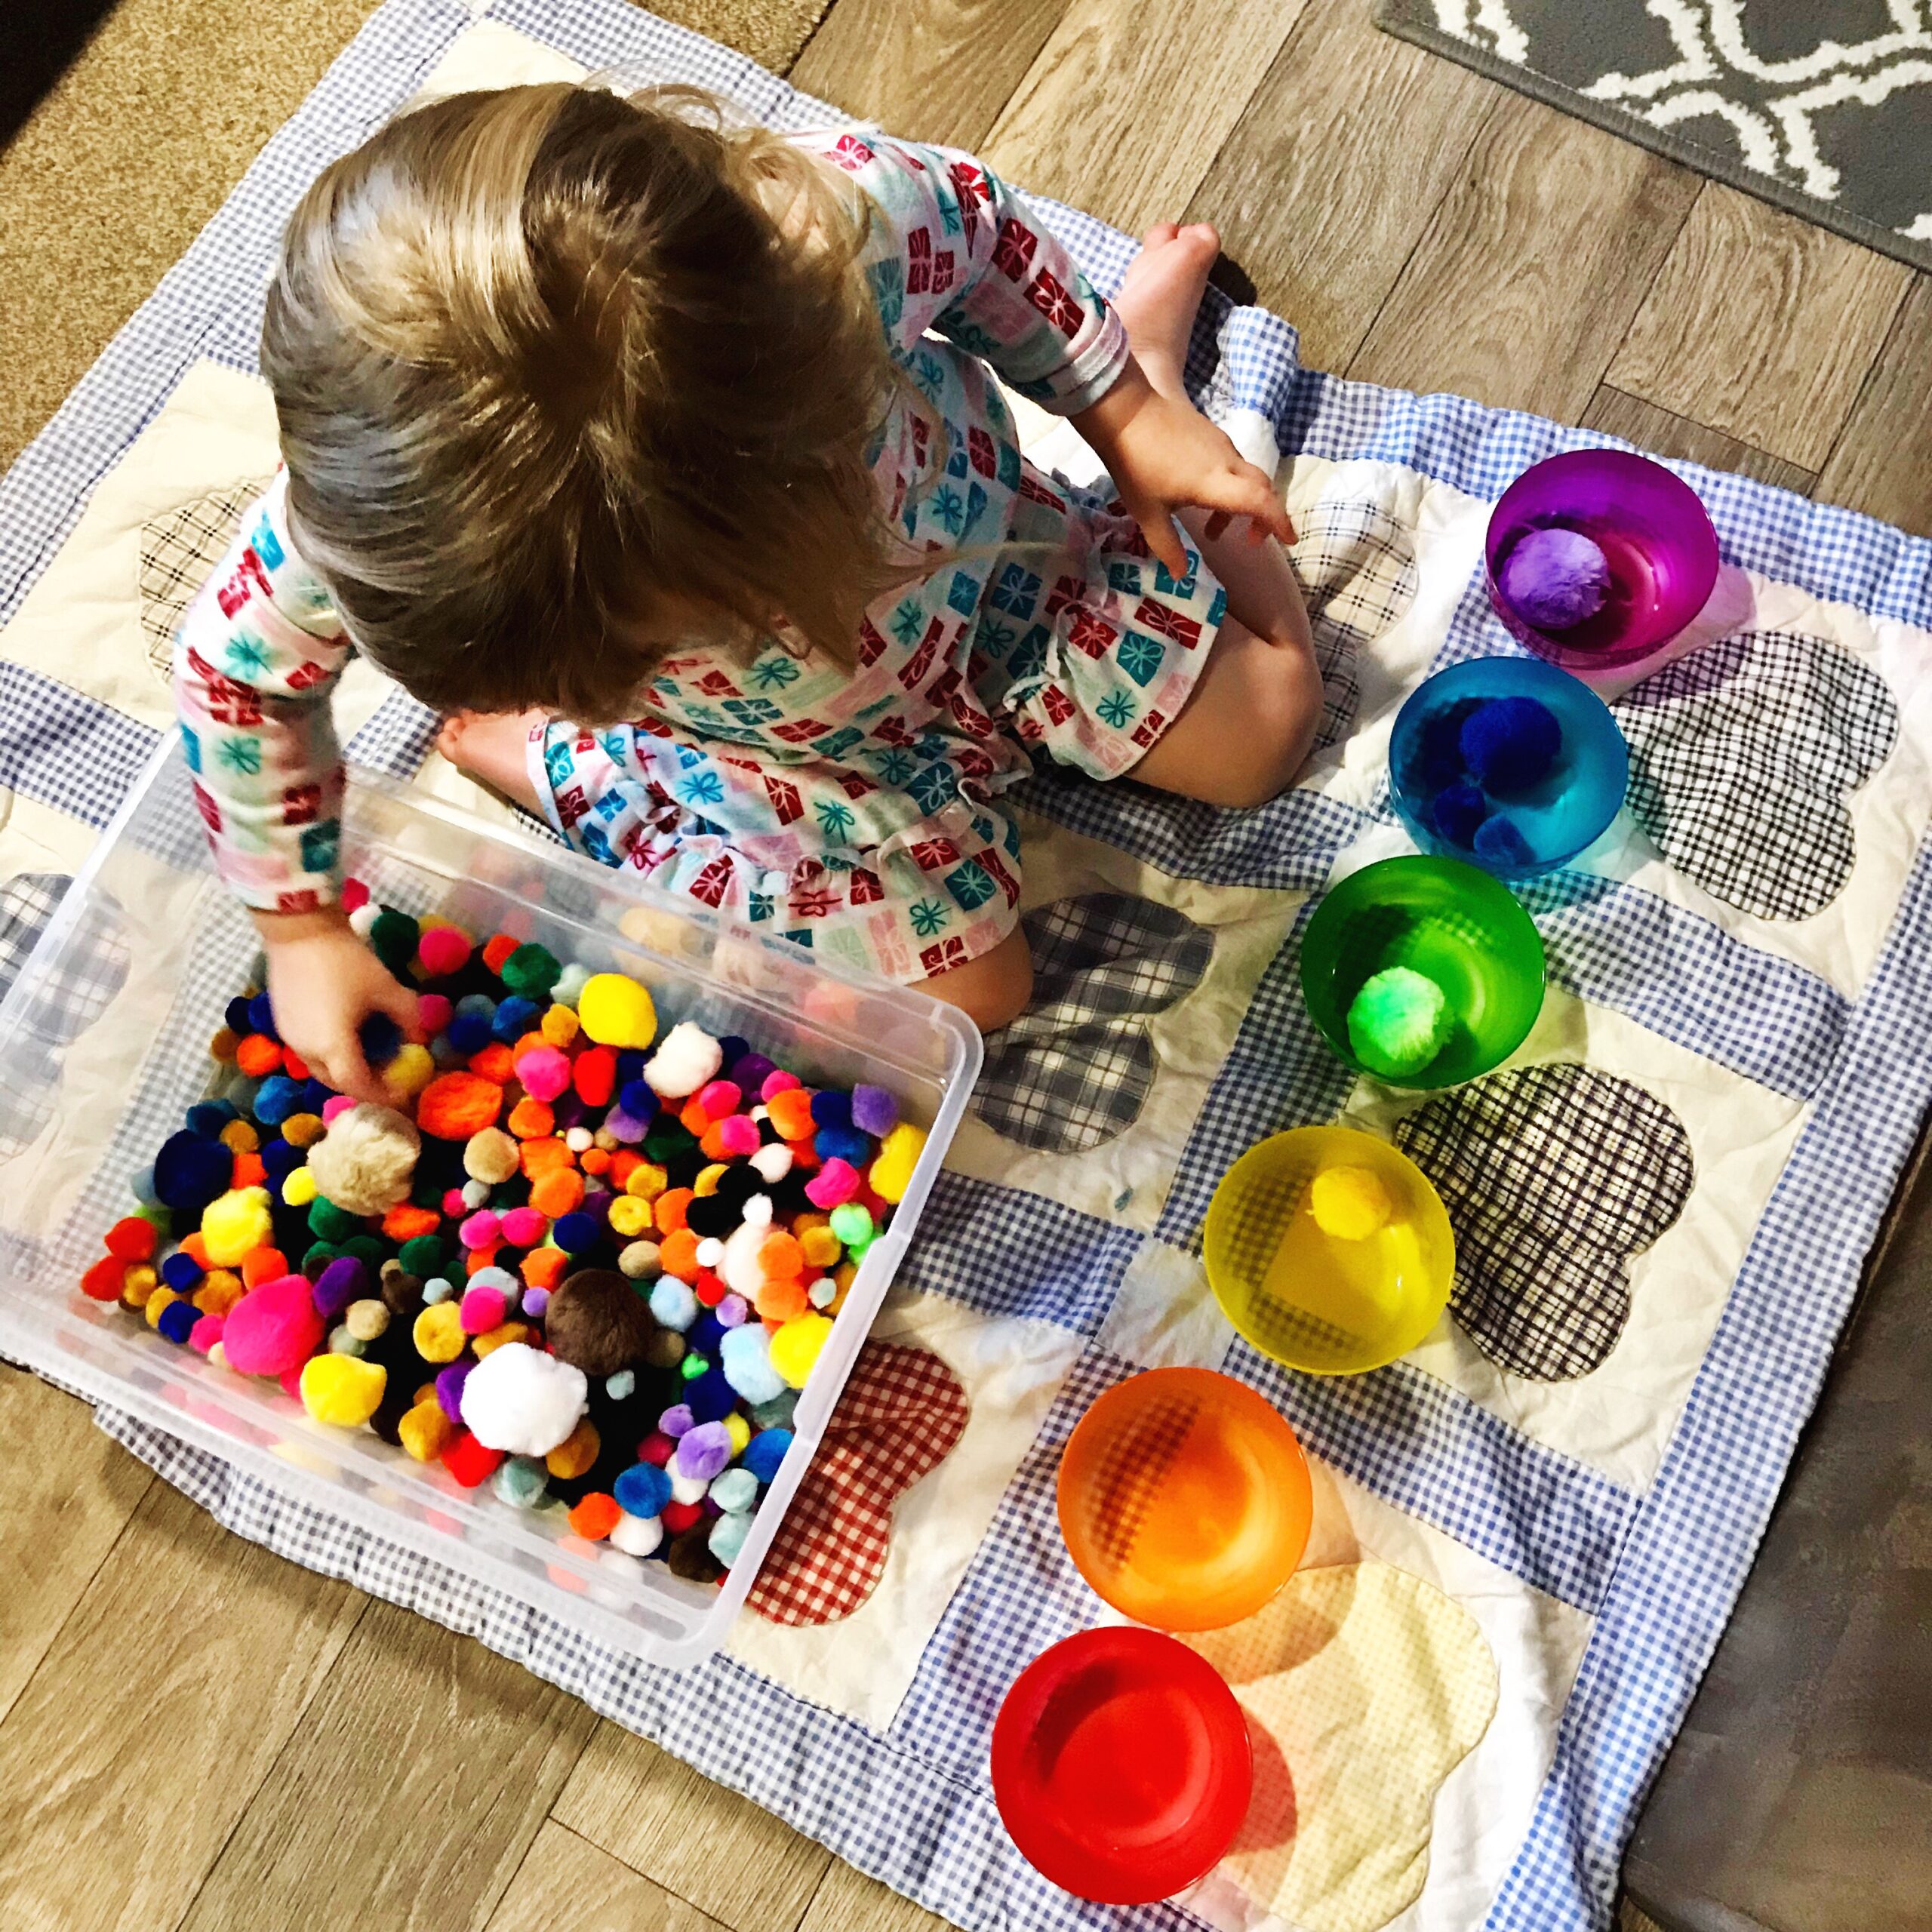 Why We Started Homeschool Preschool with our 2 Year Old